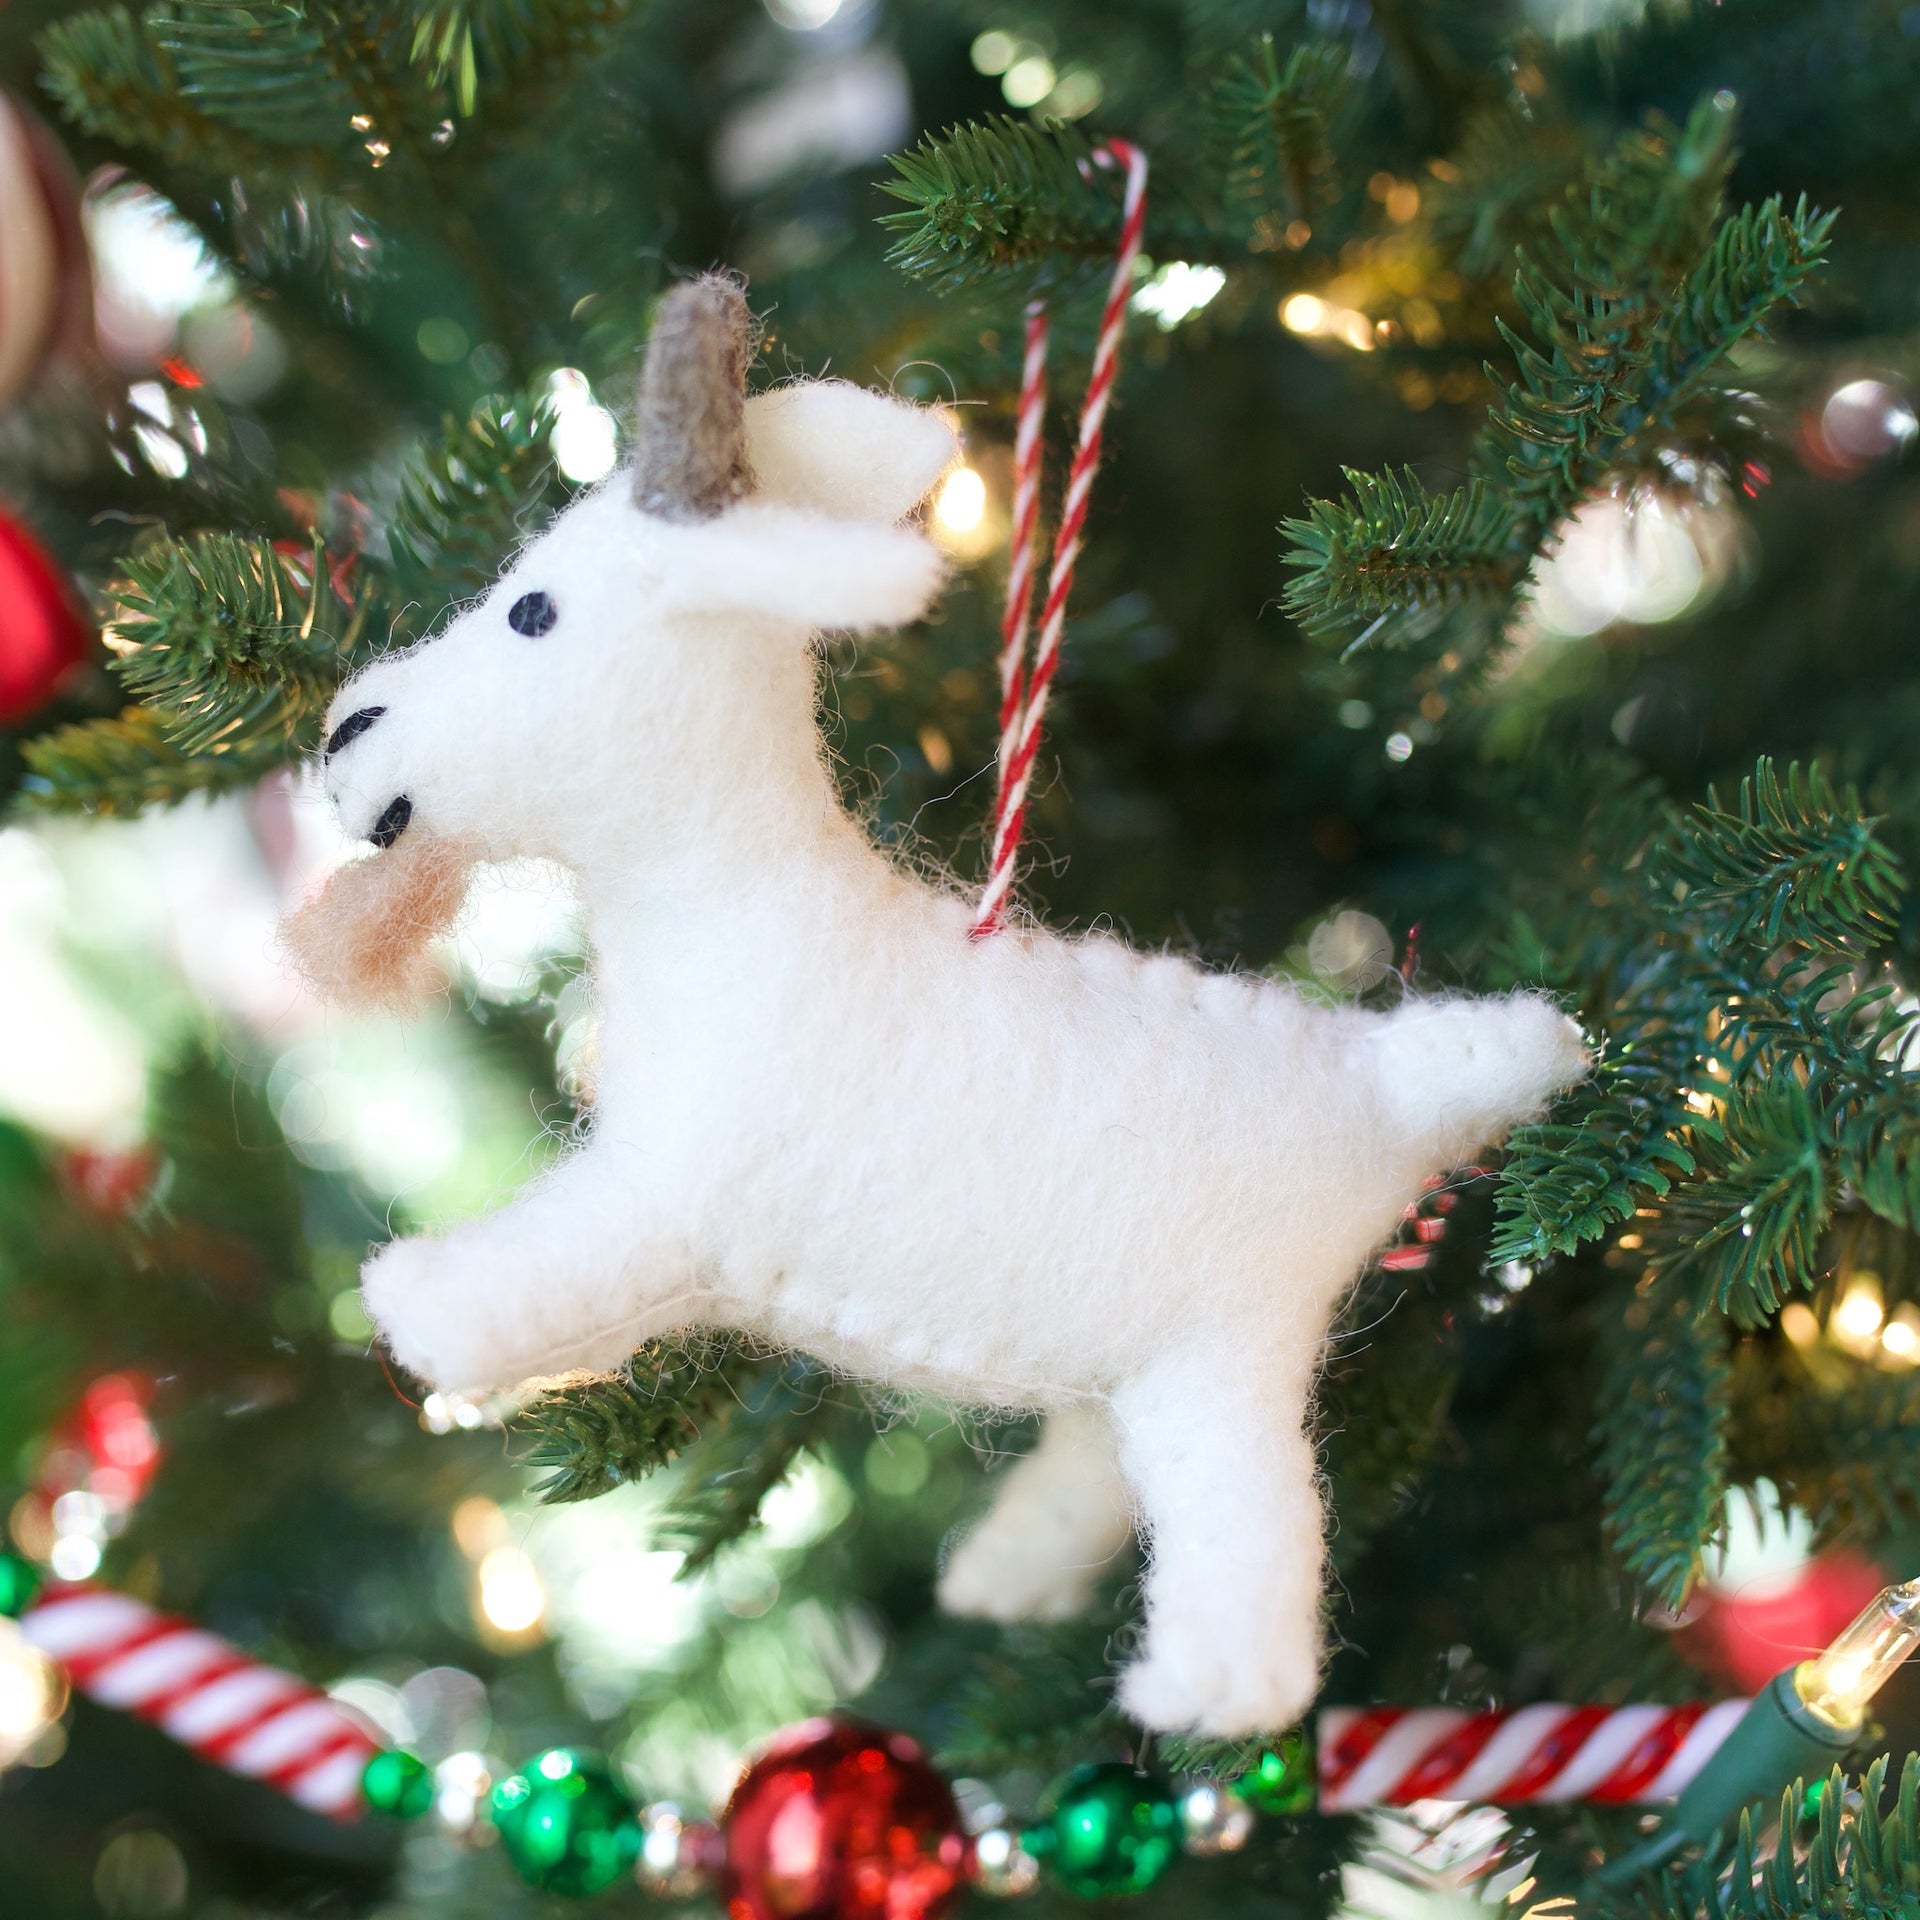 Goat Ornament hanging on Christmas Tree